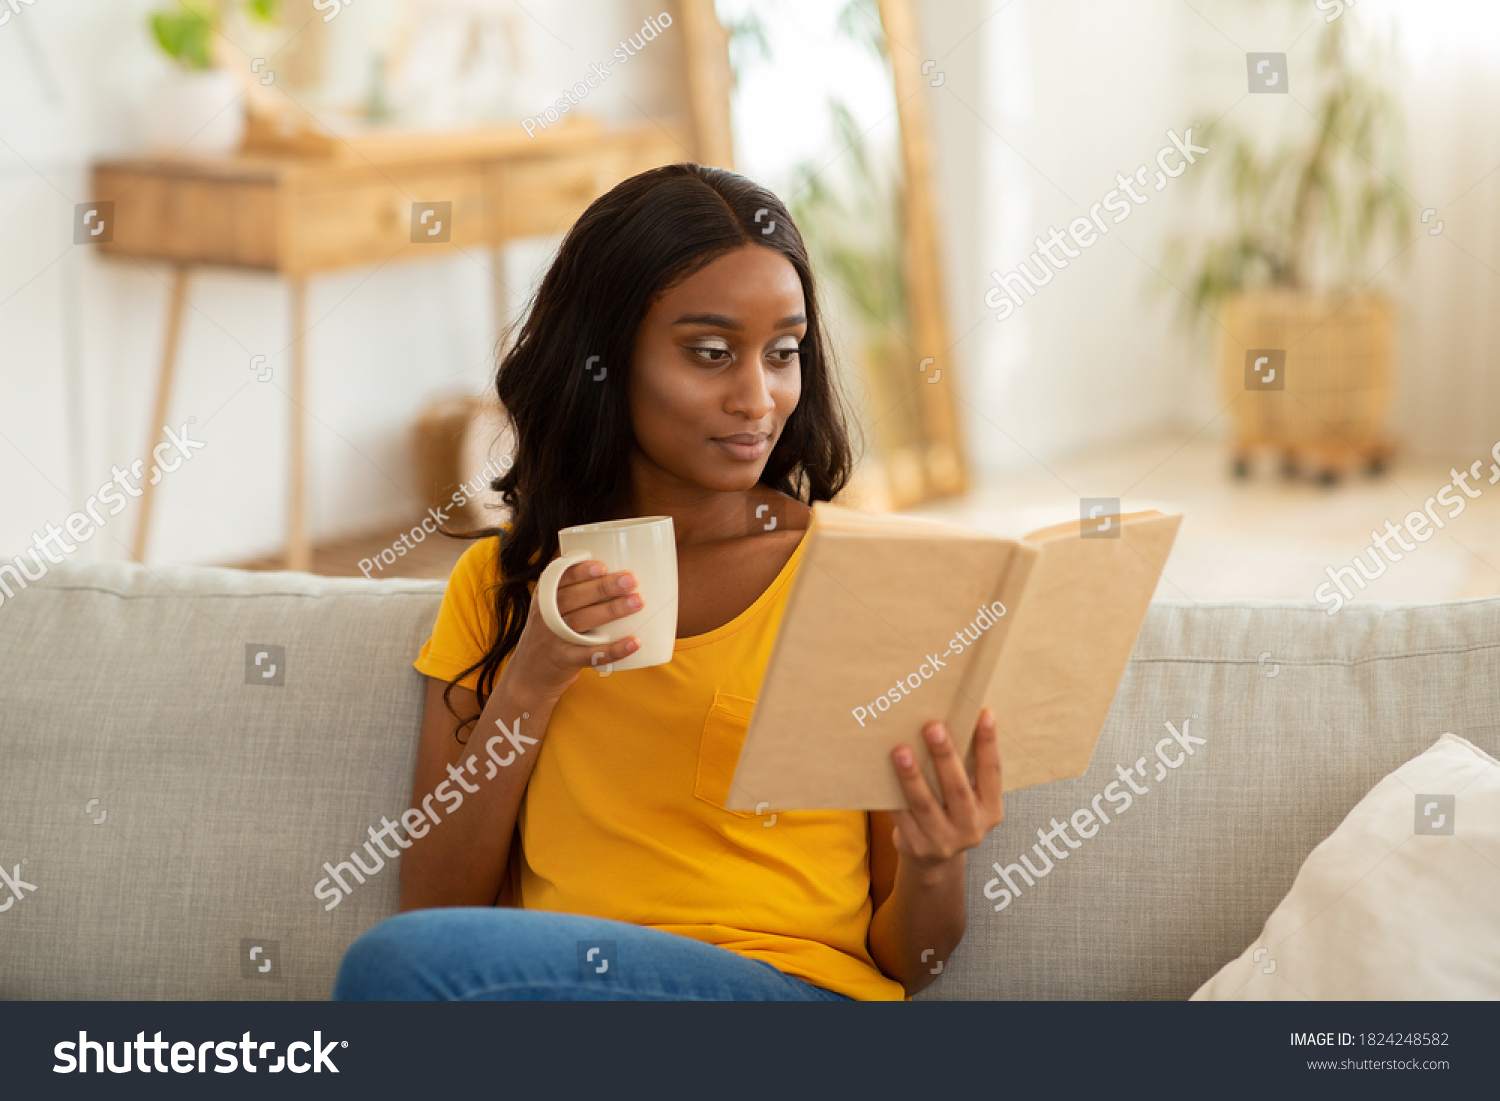 Stay home hobbies concept. Attractive millennial black lady reading book with cup of hot beverage in living room. Focused African American woman with aromatic drink absorbed in intriguing story #1824248582